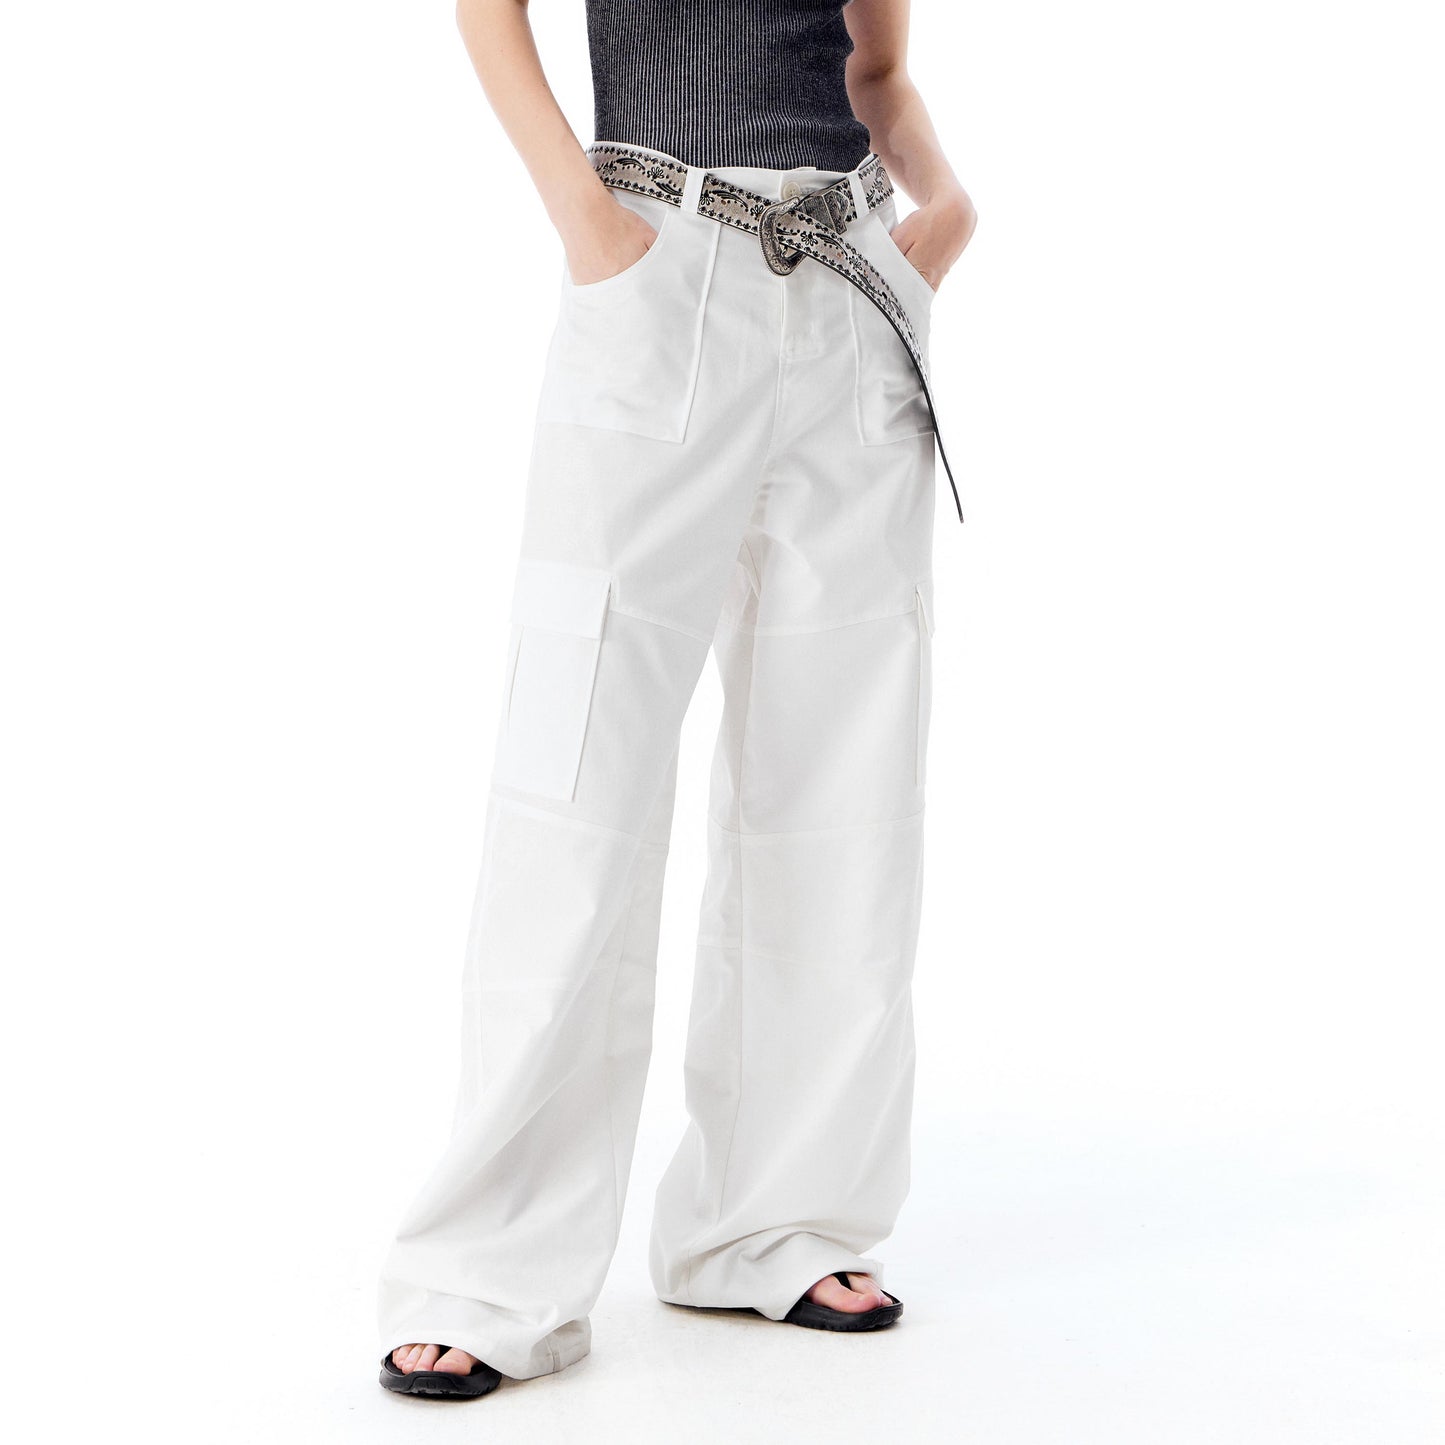 NUTH ‘Unisex’ White Overalls